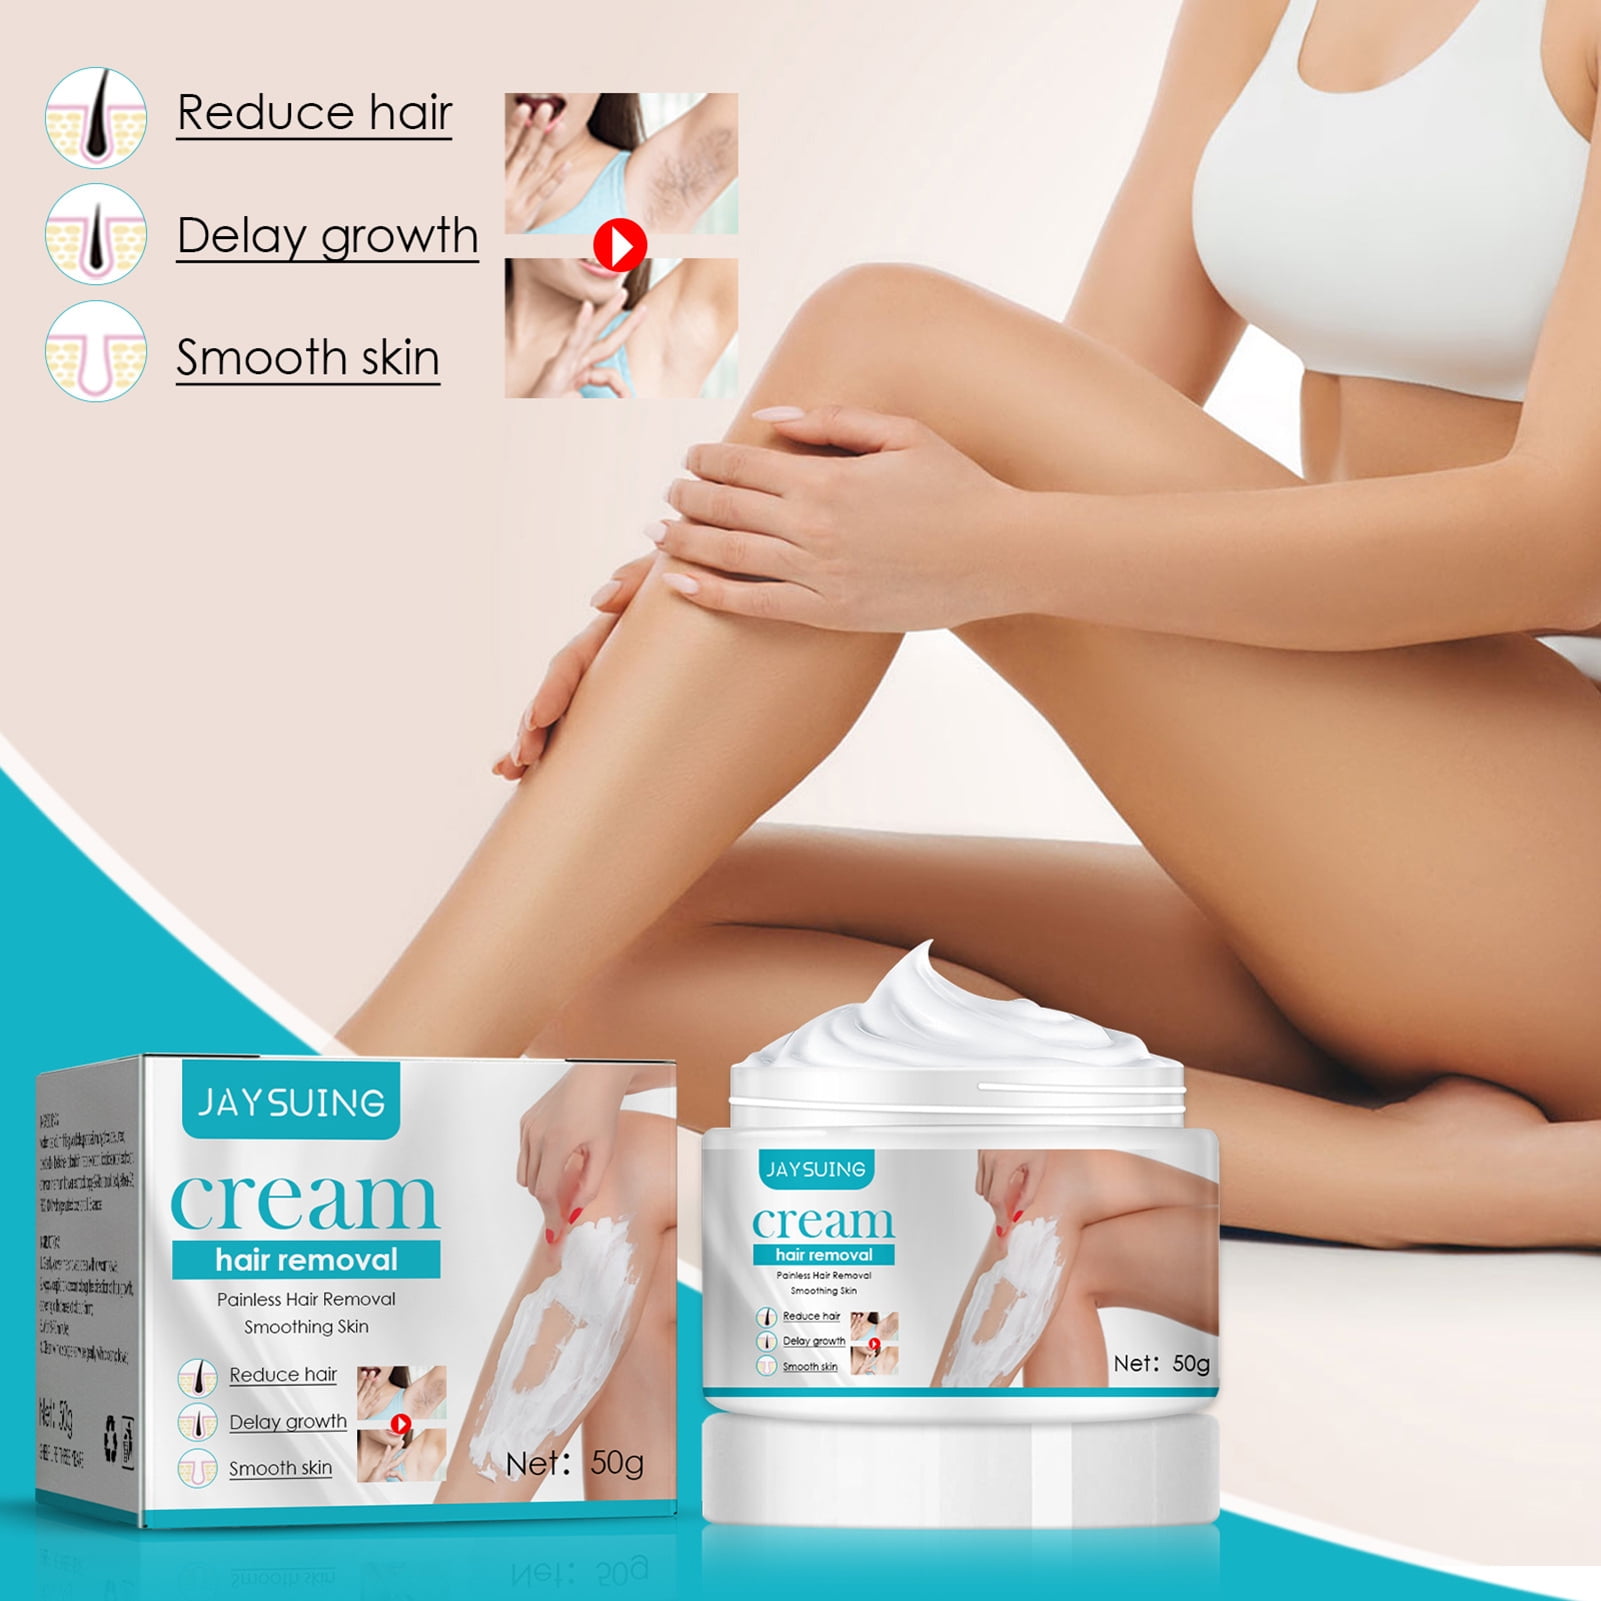 Cheers US 50g Intimate/Private Hair Removal Cream for Women, for Unwanted  Hair in Underarms, Private Parts, Pubic & Bikini Area, Painless Flawless Depilatory  Cream 